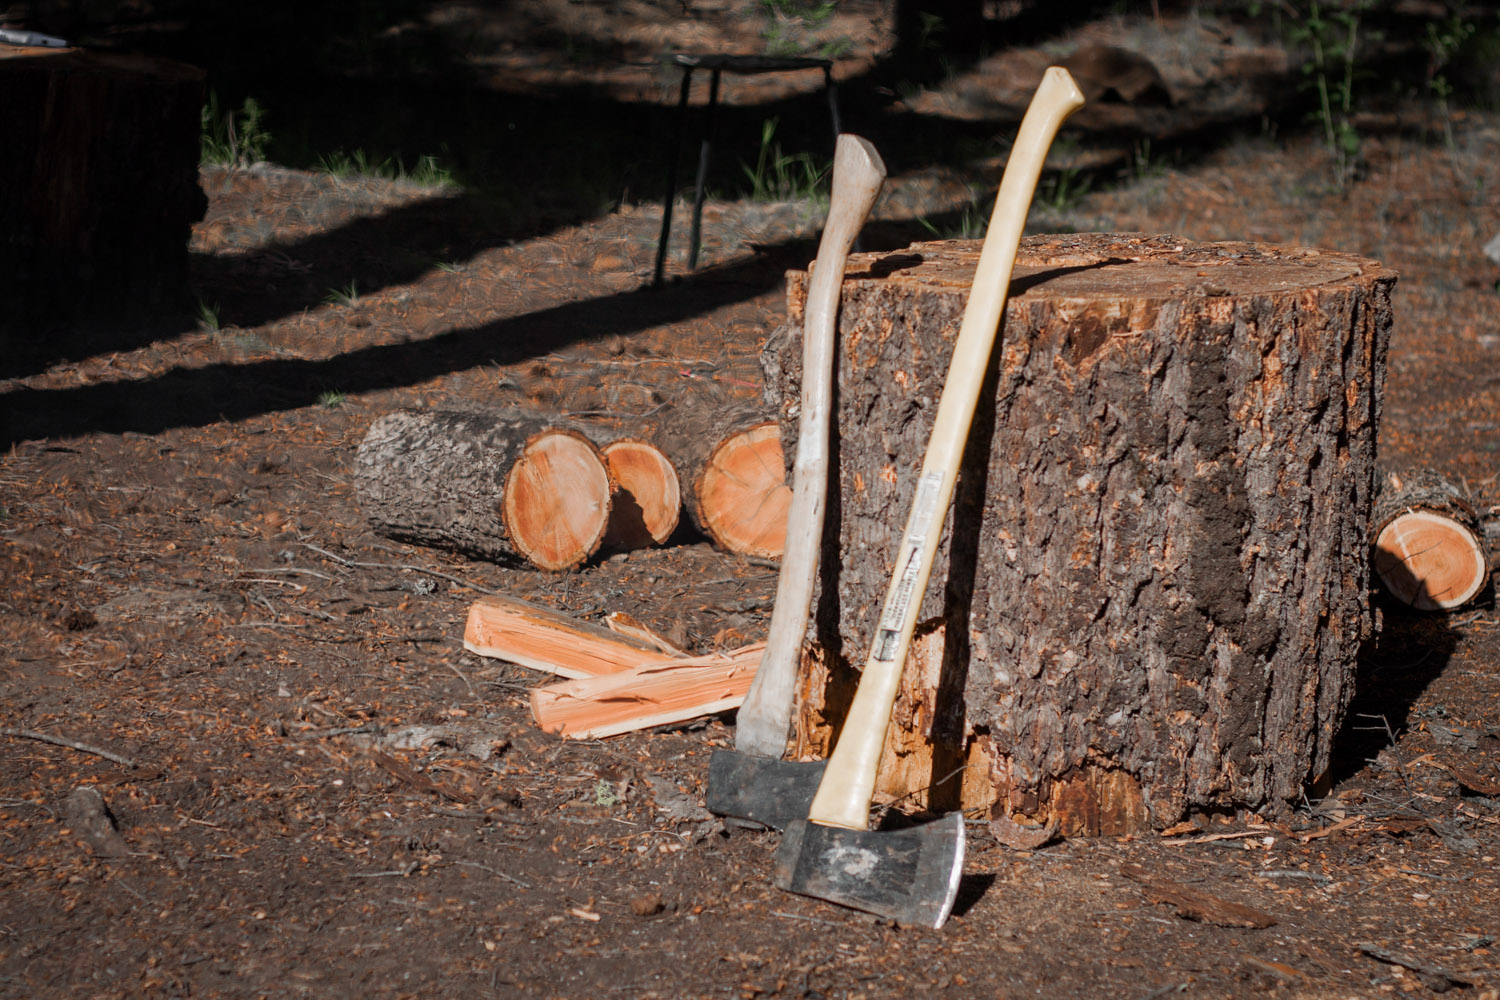 Fire supplies: axes and kindling